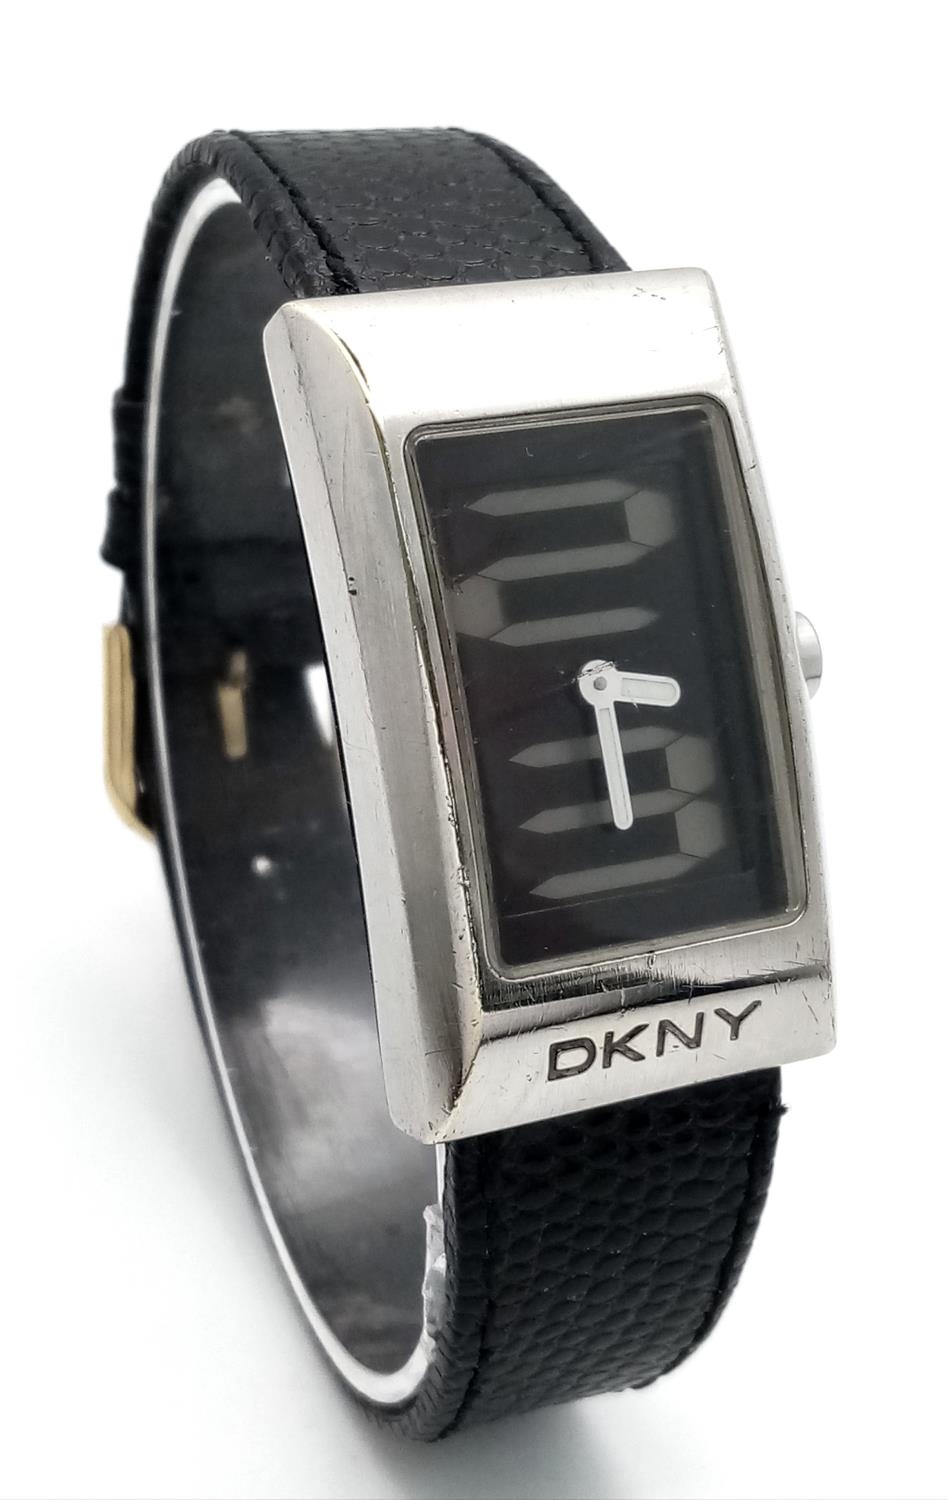 A DKNY Quartz Ladies Watch. Black leather strap. Stainless steel case - 24mm. Analogue/digital dial. - Image 5 of 6